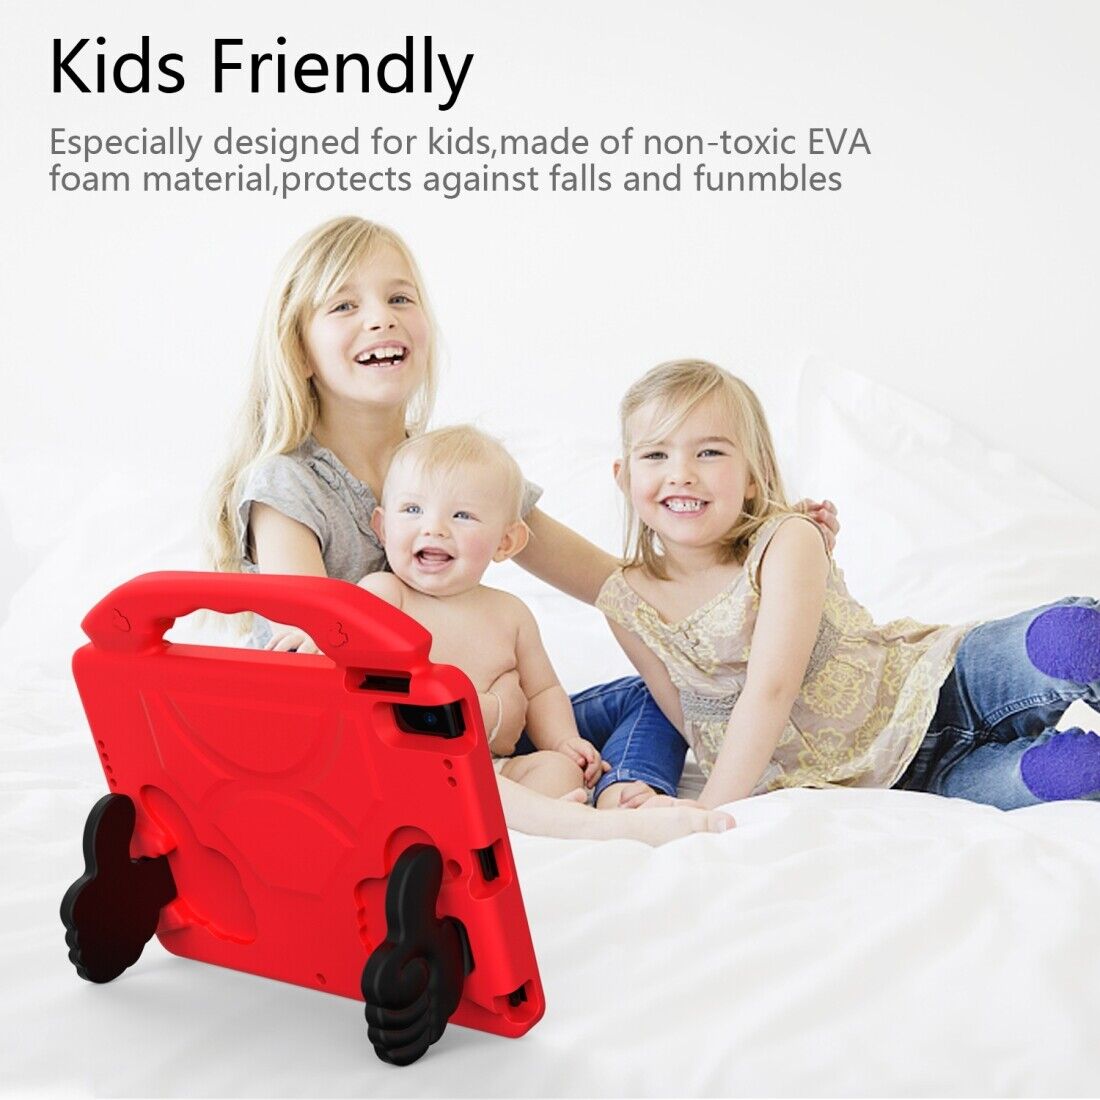 For Apple iPad 10.2 7th Gen 2019 Kids Friendly Case Shockproof Cover With Thumbs Up - Red-www.firsthelptech.ie